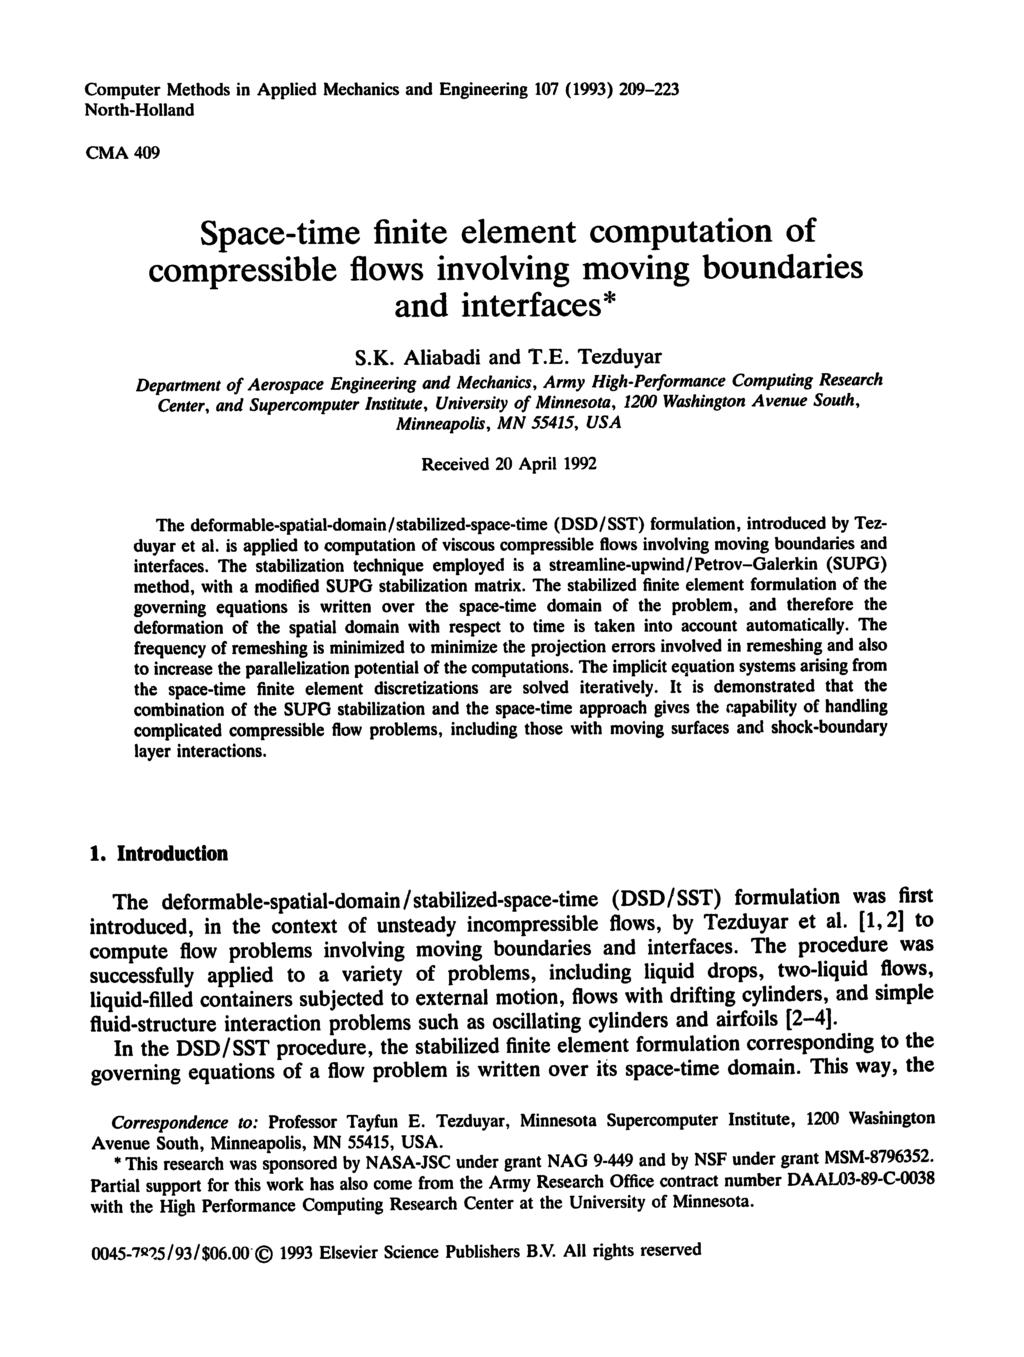 Computer Methods in Applied Mechanics and Engineering 107 (1993) 209-223 North-Holland CMA 409 Space-time finite element computation of compressible flows involving moving boundaries and interfaces*